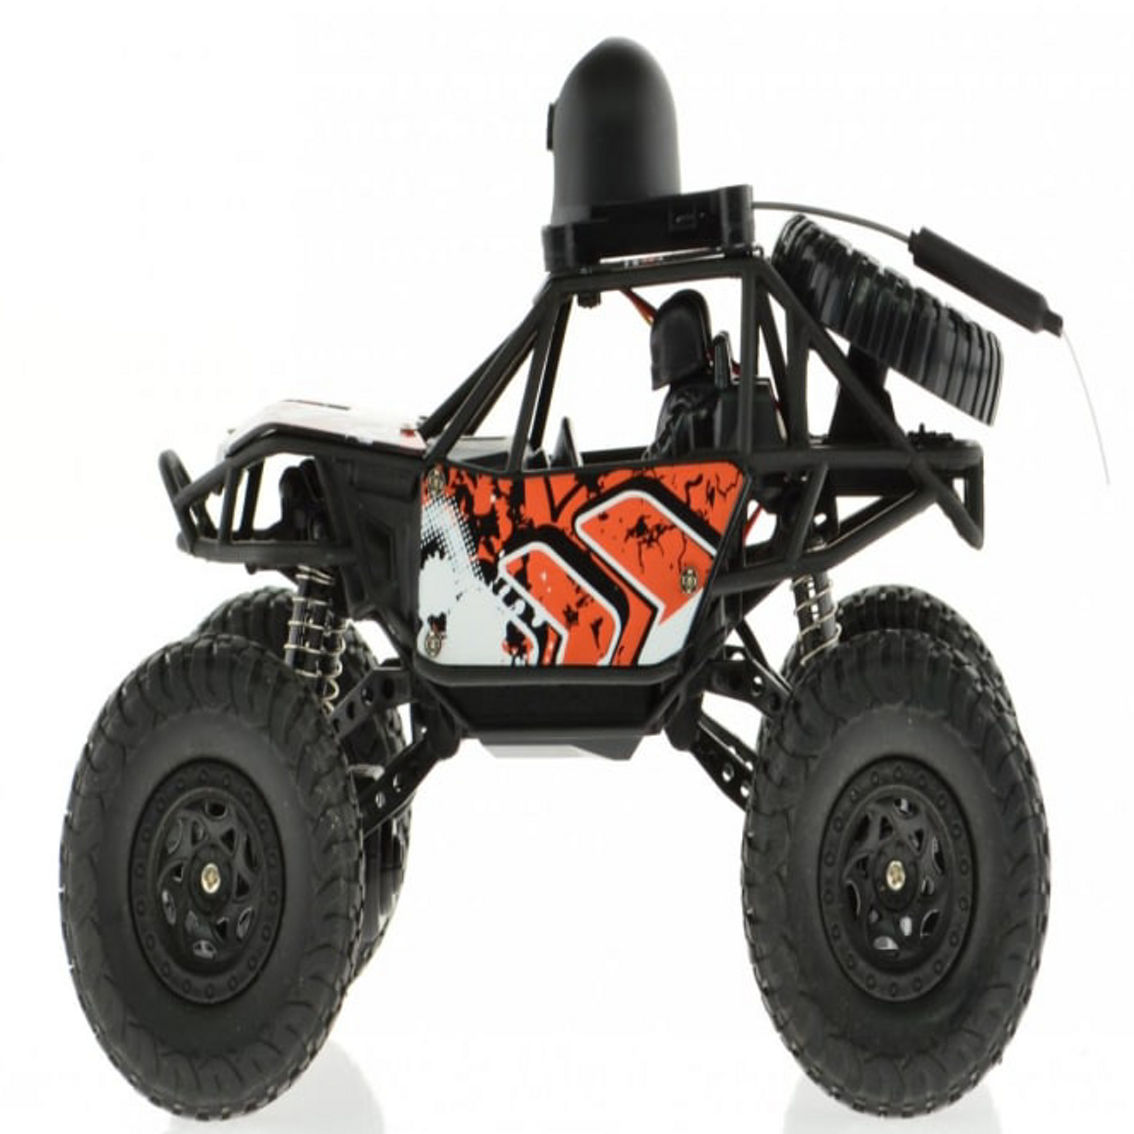 CIS-S-003W-G 1:22 rock climber with FPV camera Proportional speed and steering - Image 4 of 5